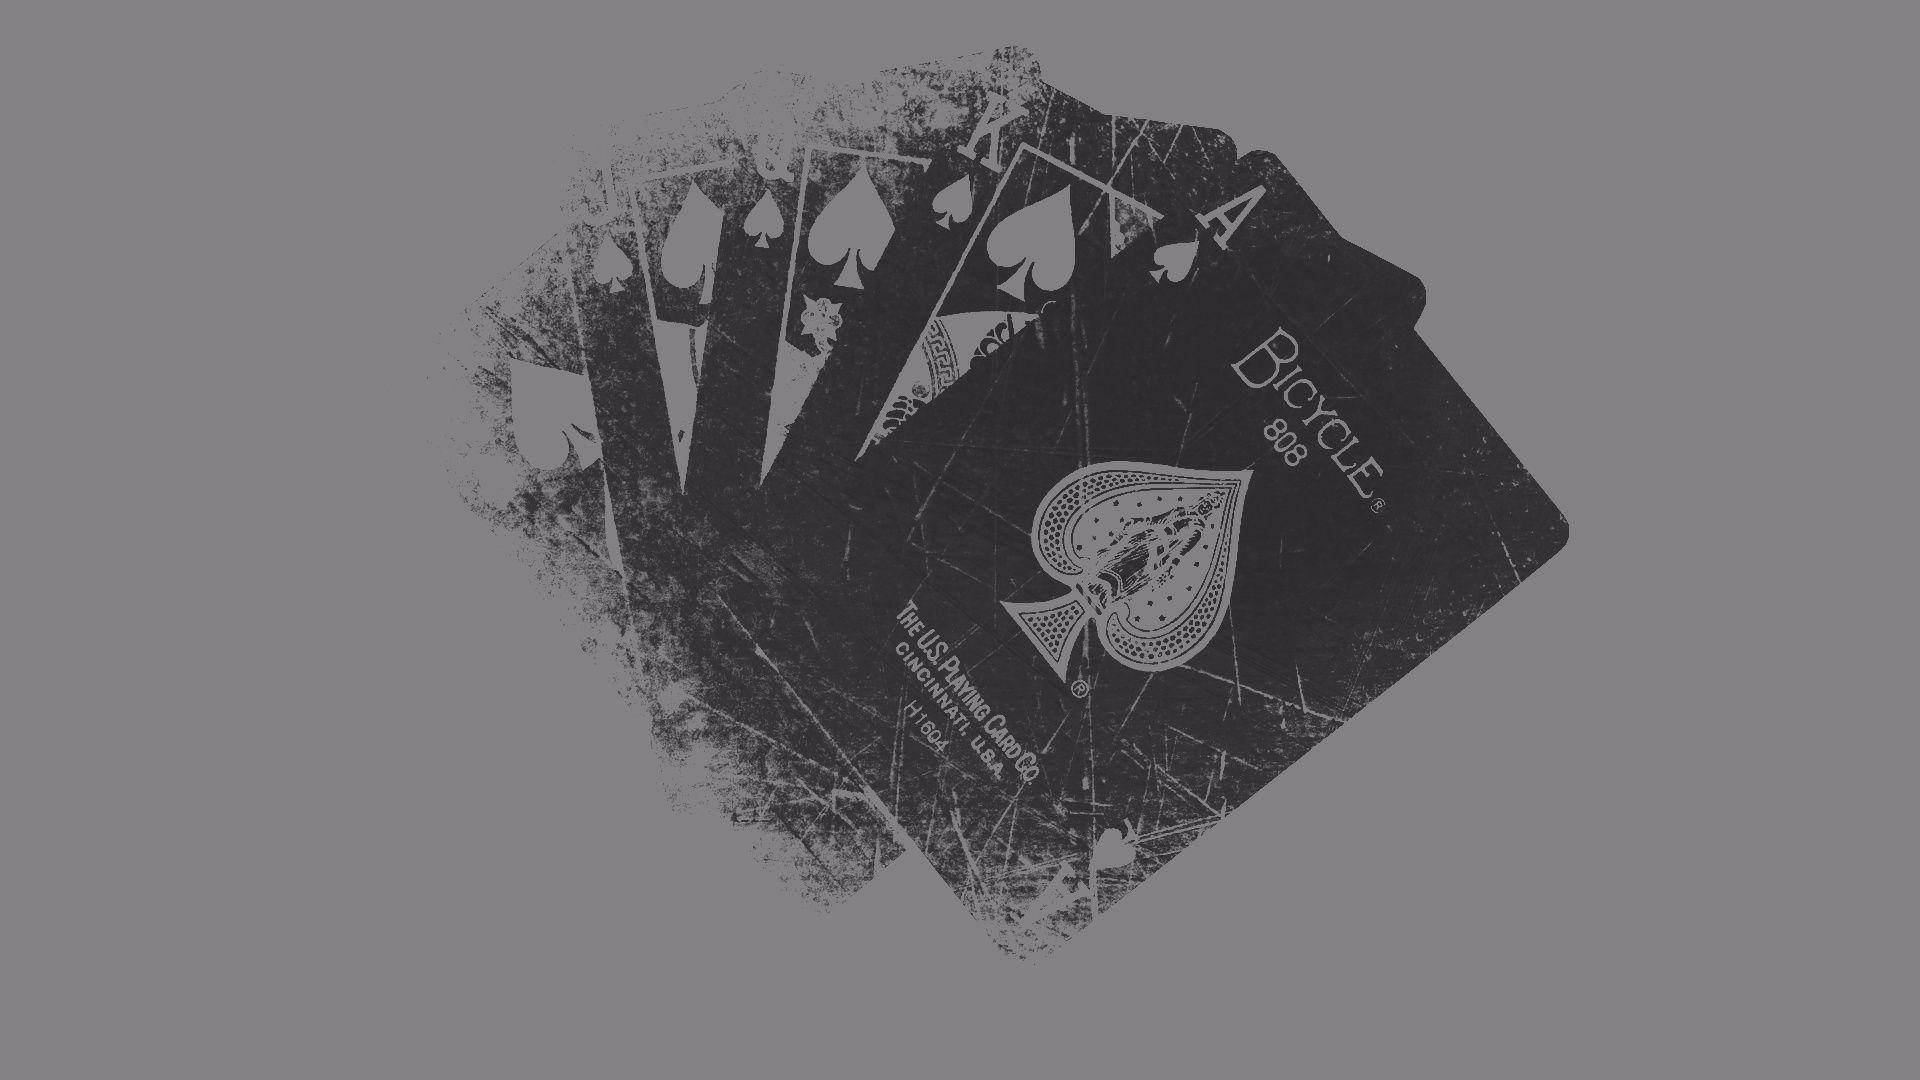 Download wallpapers ace of hearts poker playing cards black poker cards  aces poker concepts for desktop free Pictures for desktop free